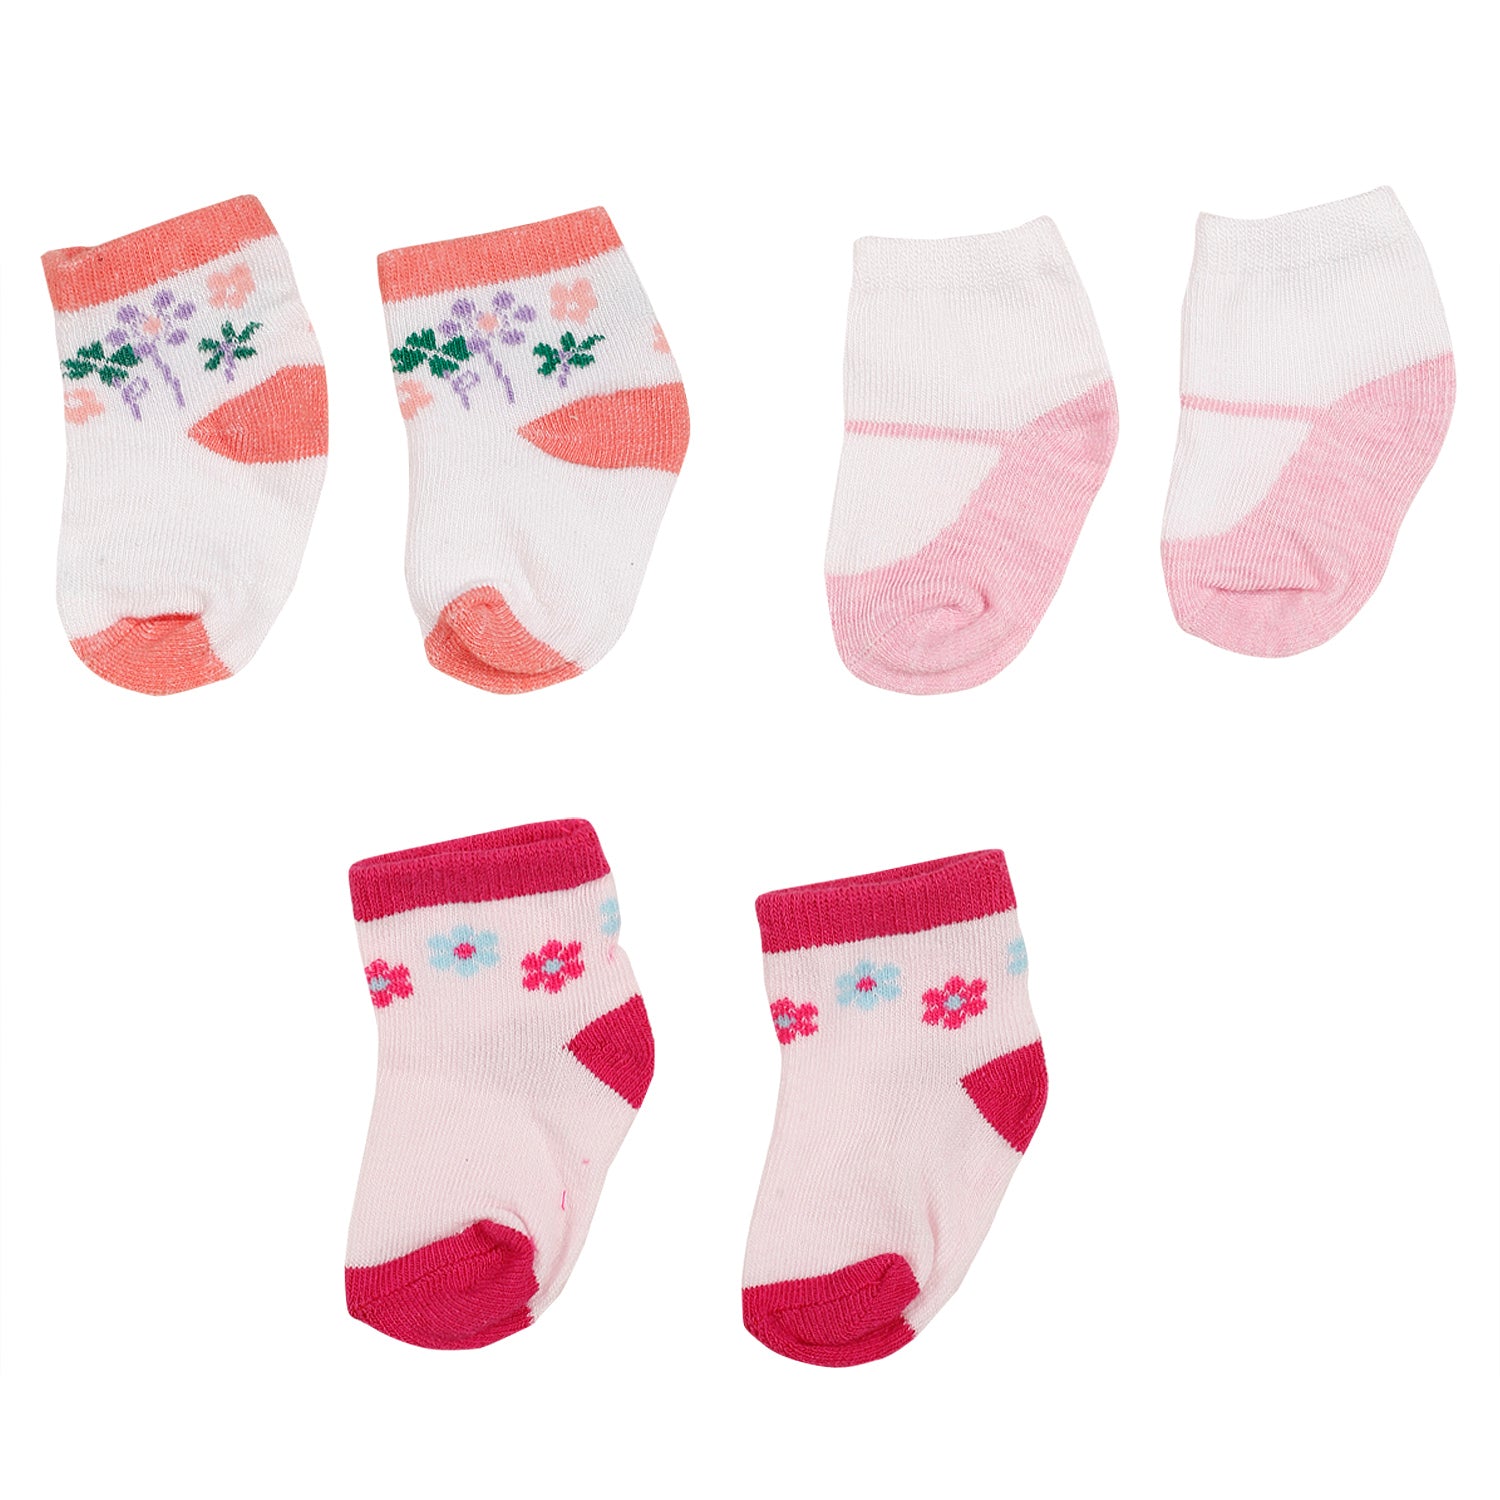 Whale Pink 6 Pcs Gift Set - Baby Moo